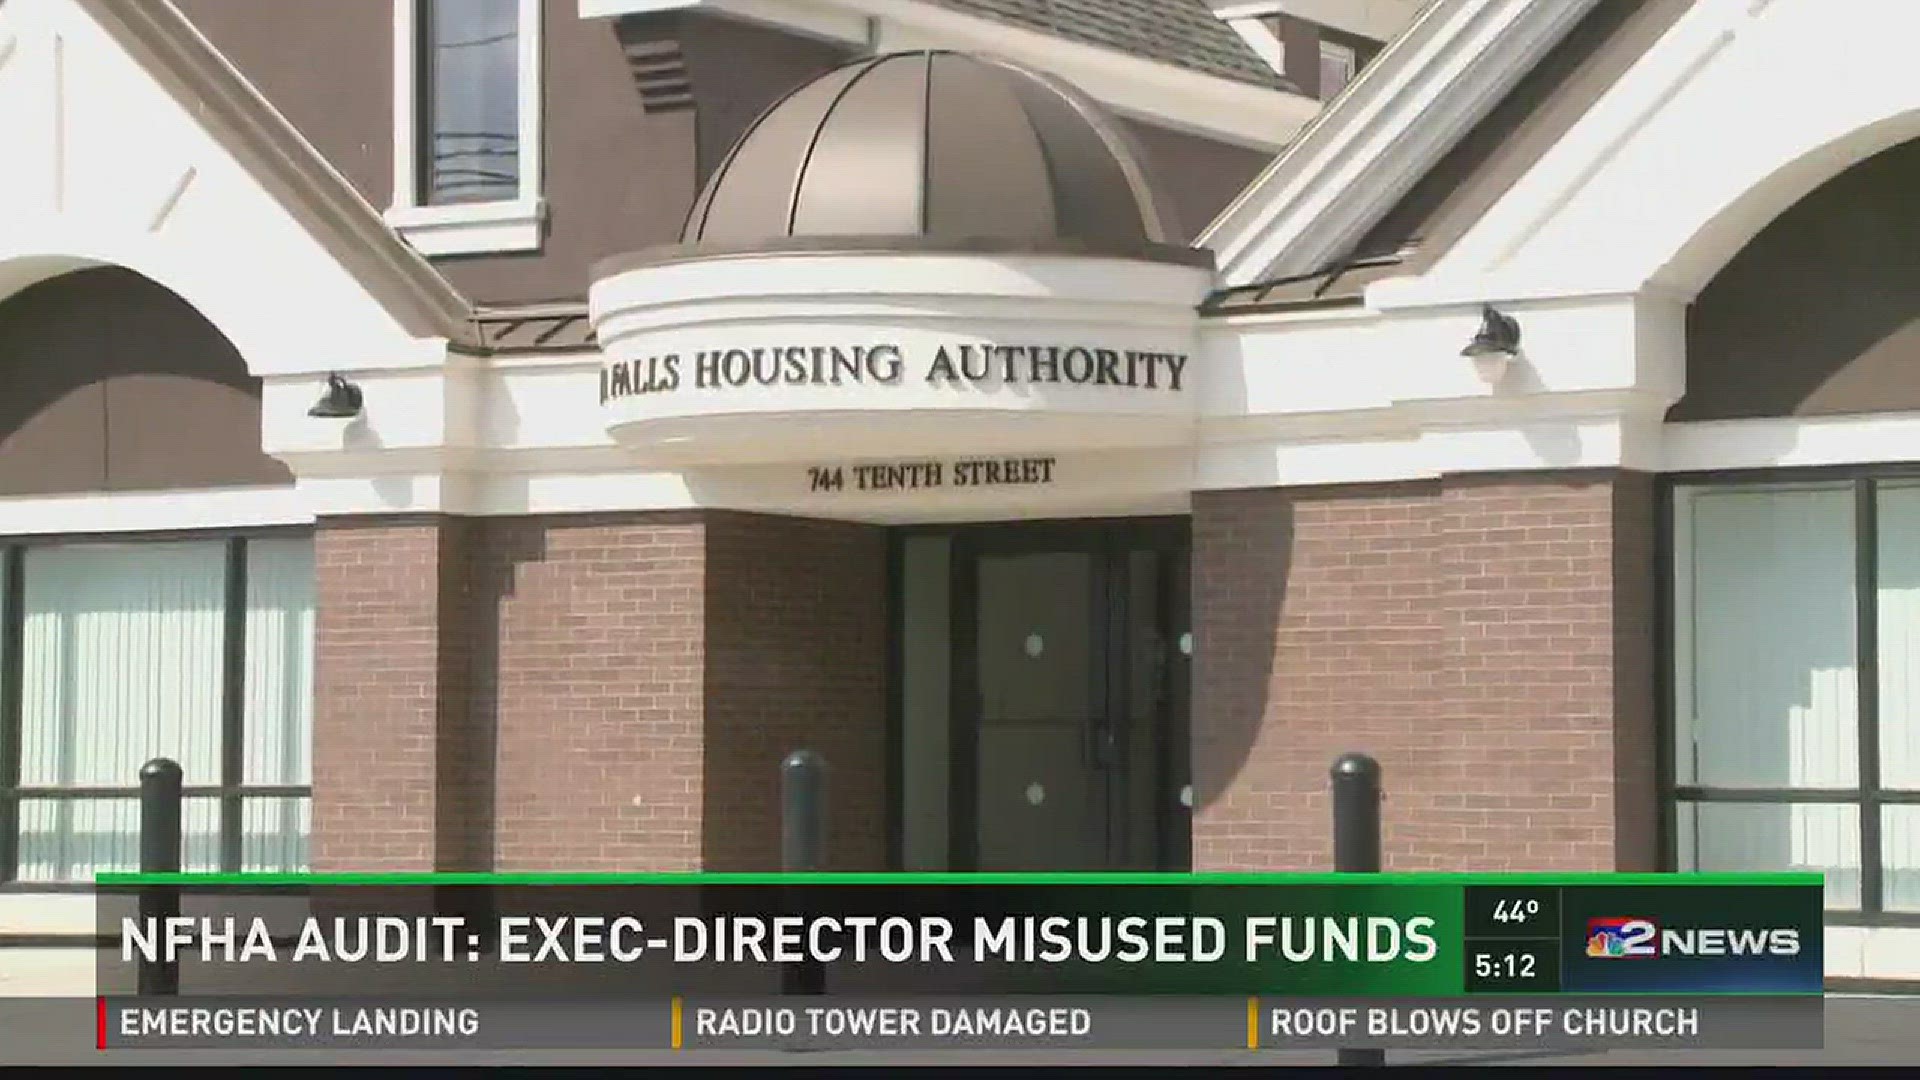 NFHA Audit: Exec-Director Misused Funds